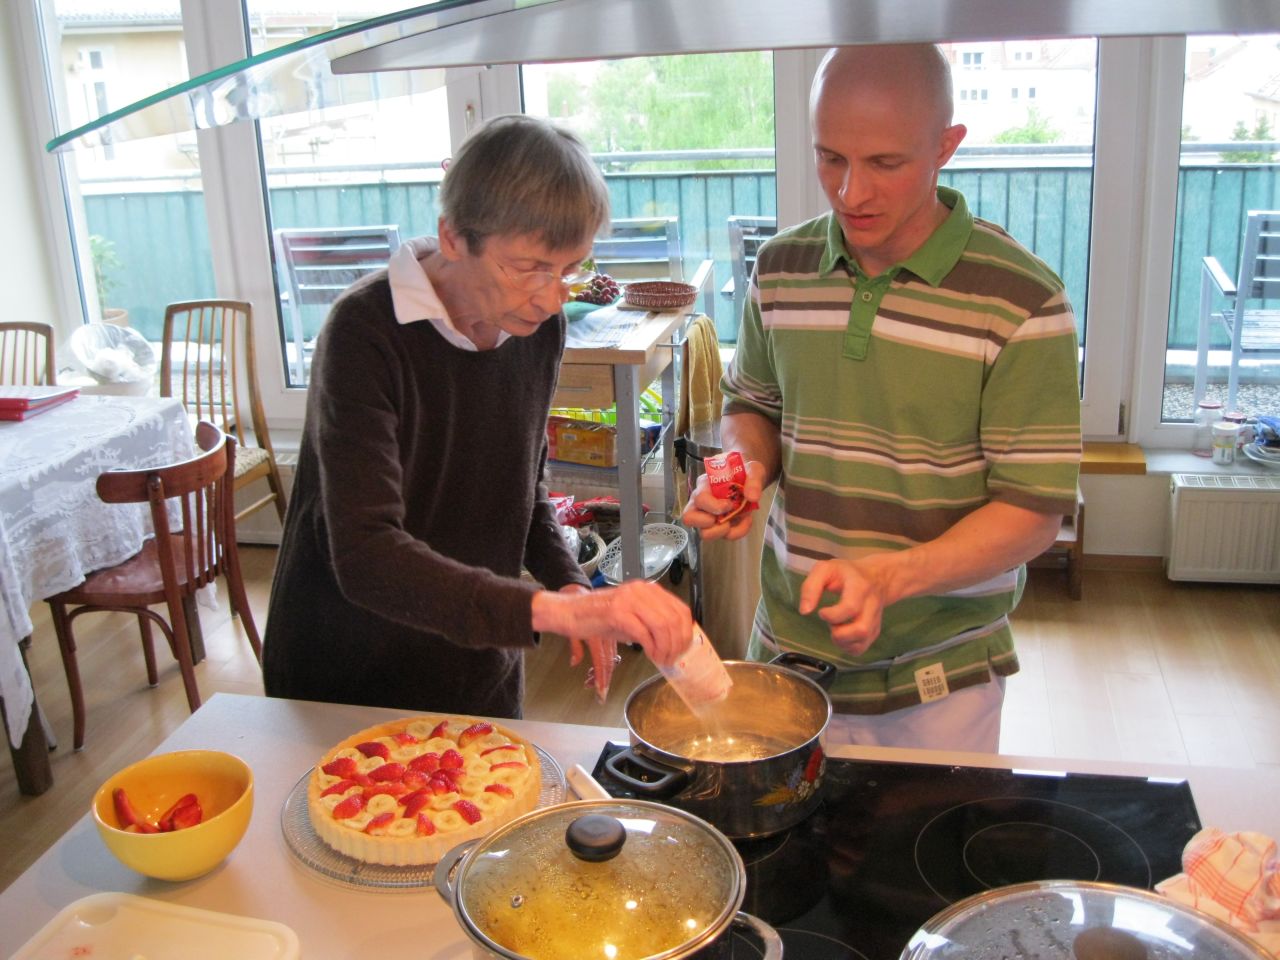 Tenant Dorothea Straube-Koberstein bakes a cake with Christoph Remmlinger, a personal care assistant, at a shared apartment for seniors in Potsdam, Germany.